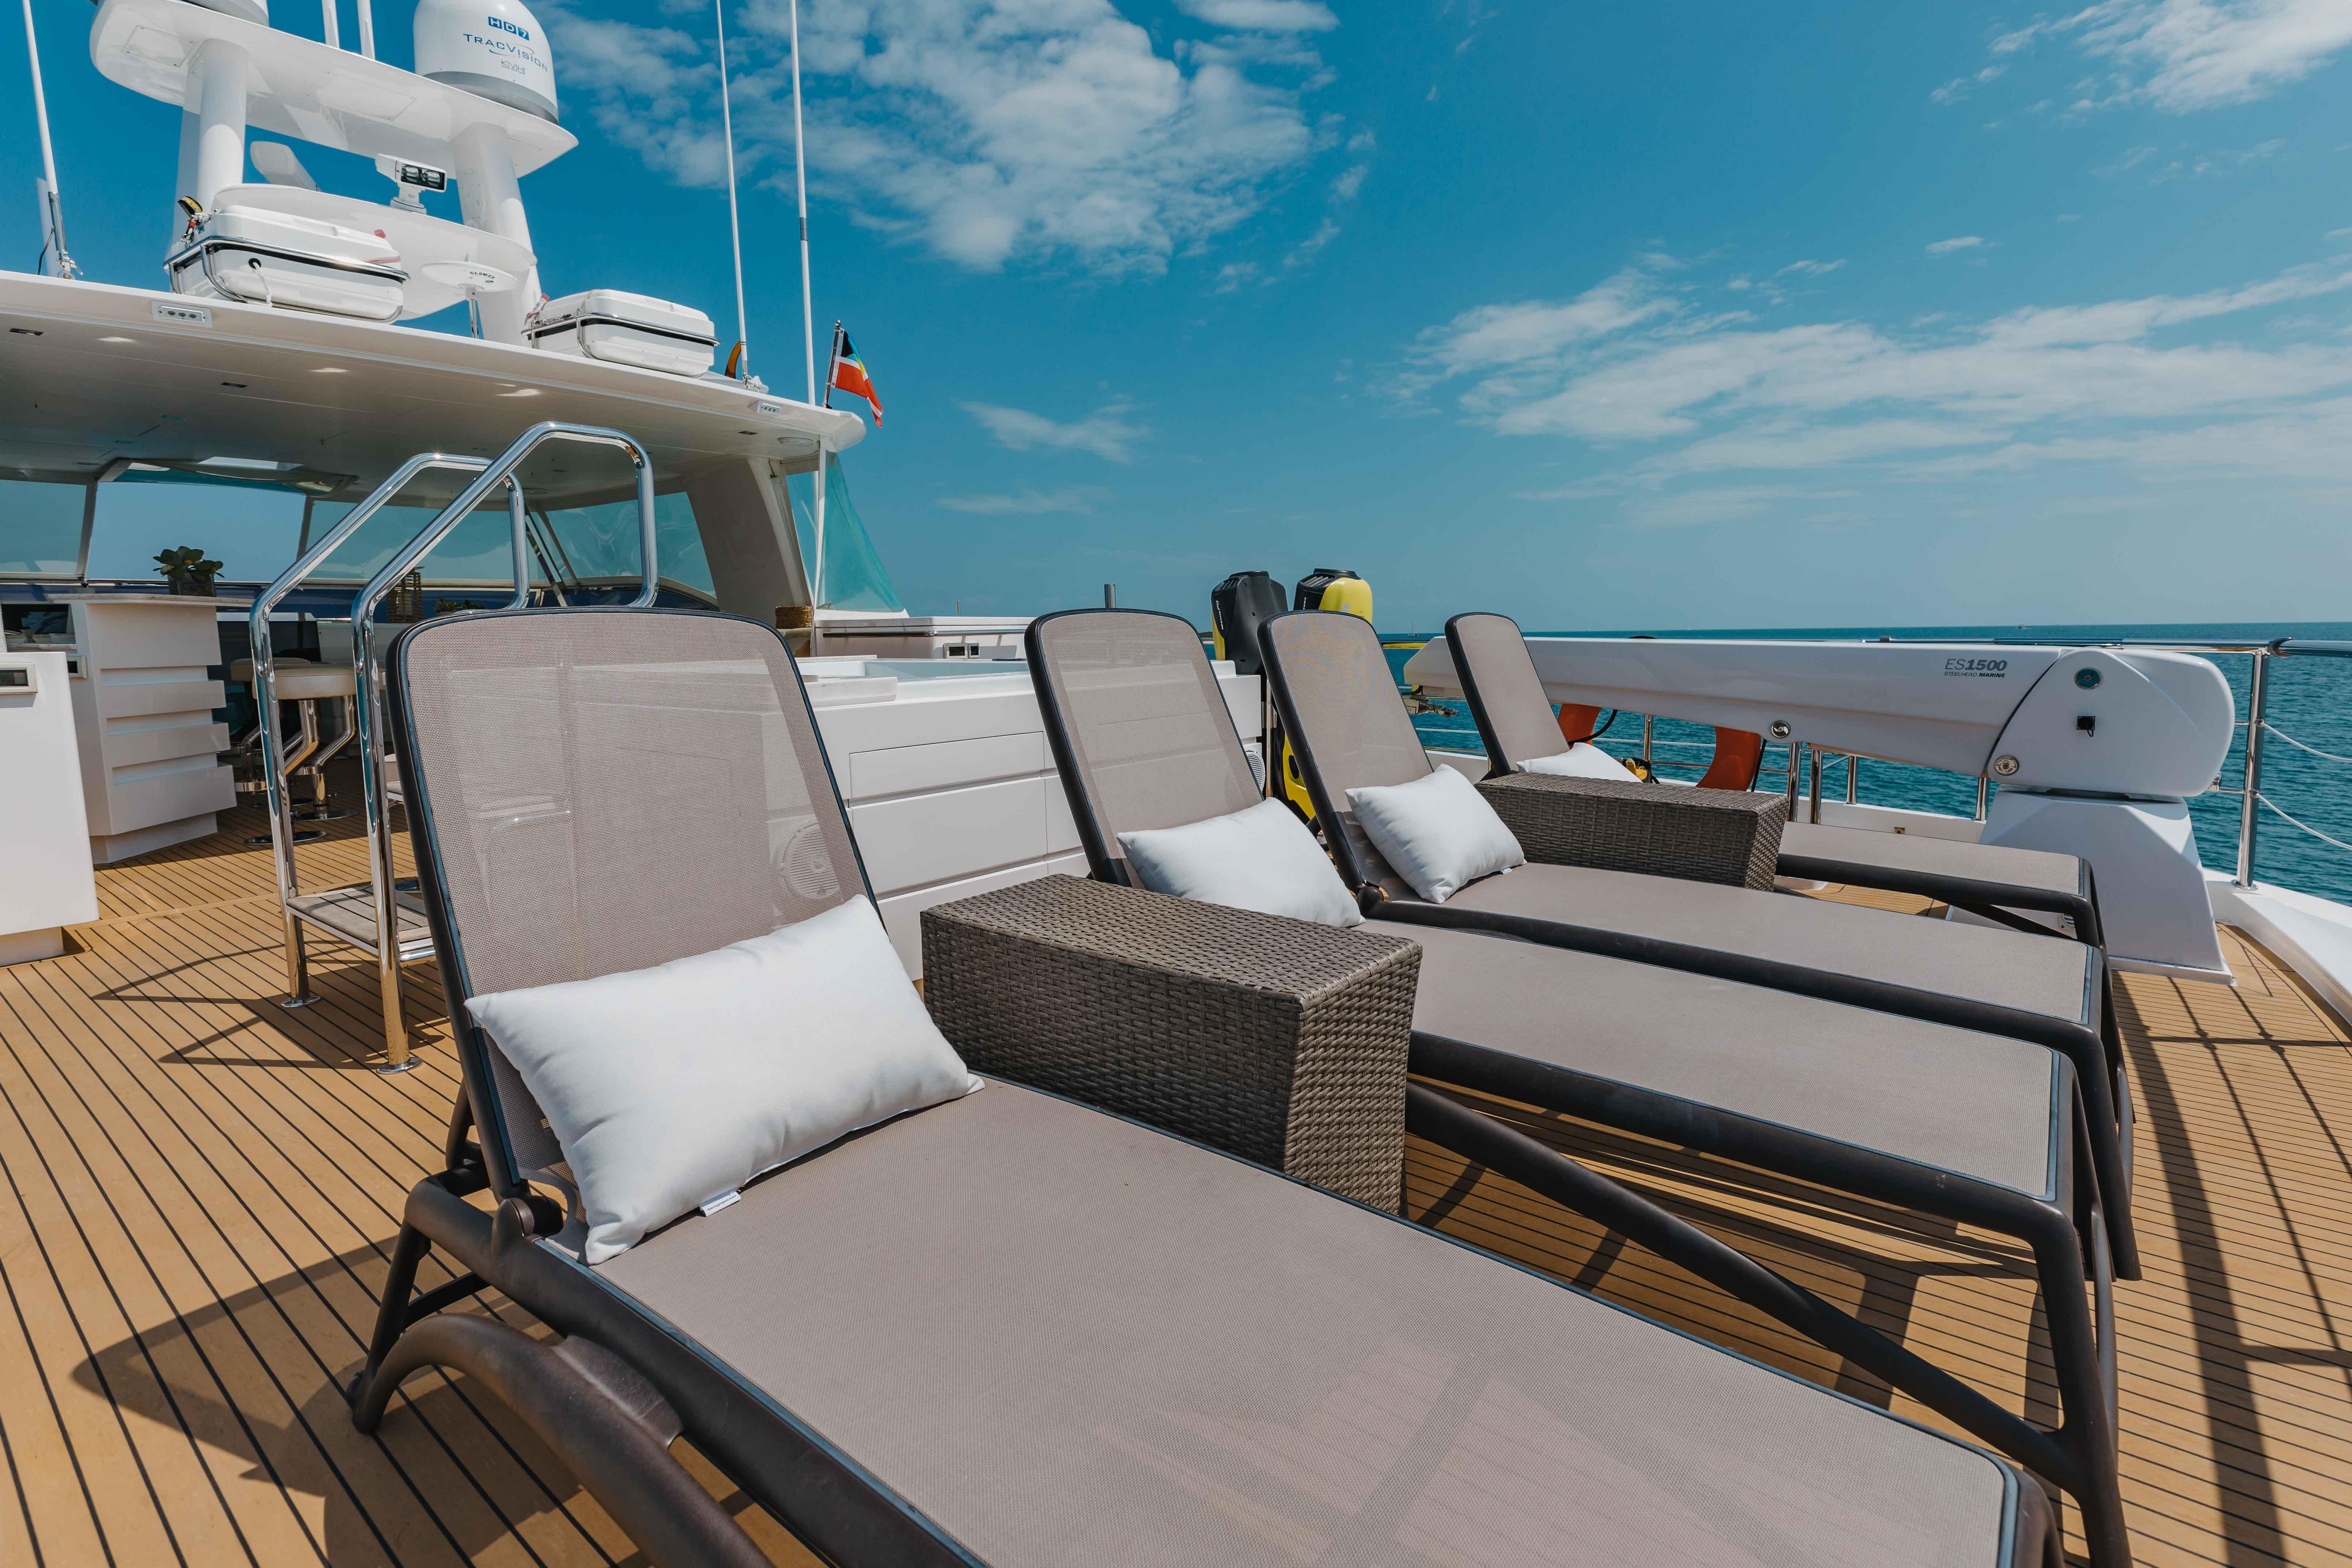 Lounge Chairs and Davit Starboard